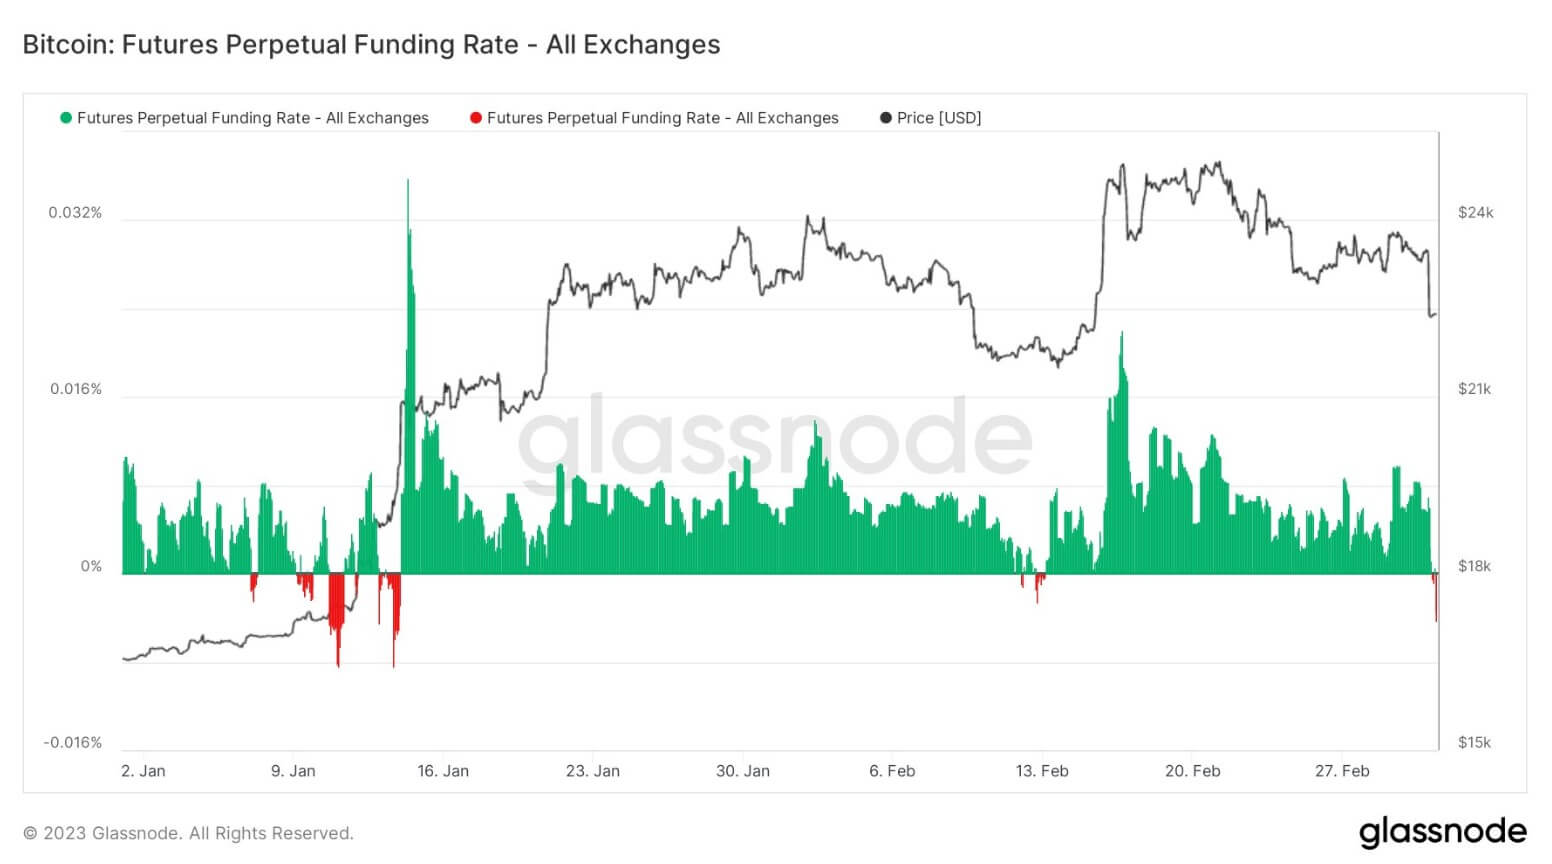 Futures Perp Funding Rate: (Source: Glassnode)